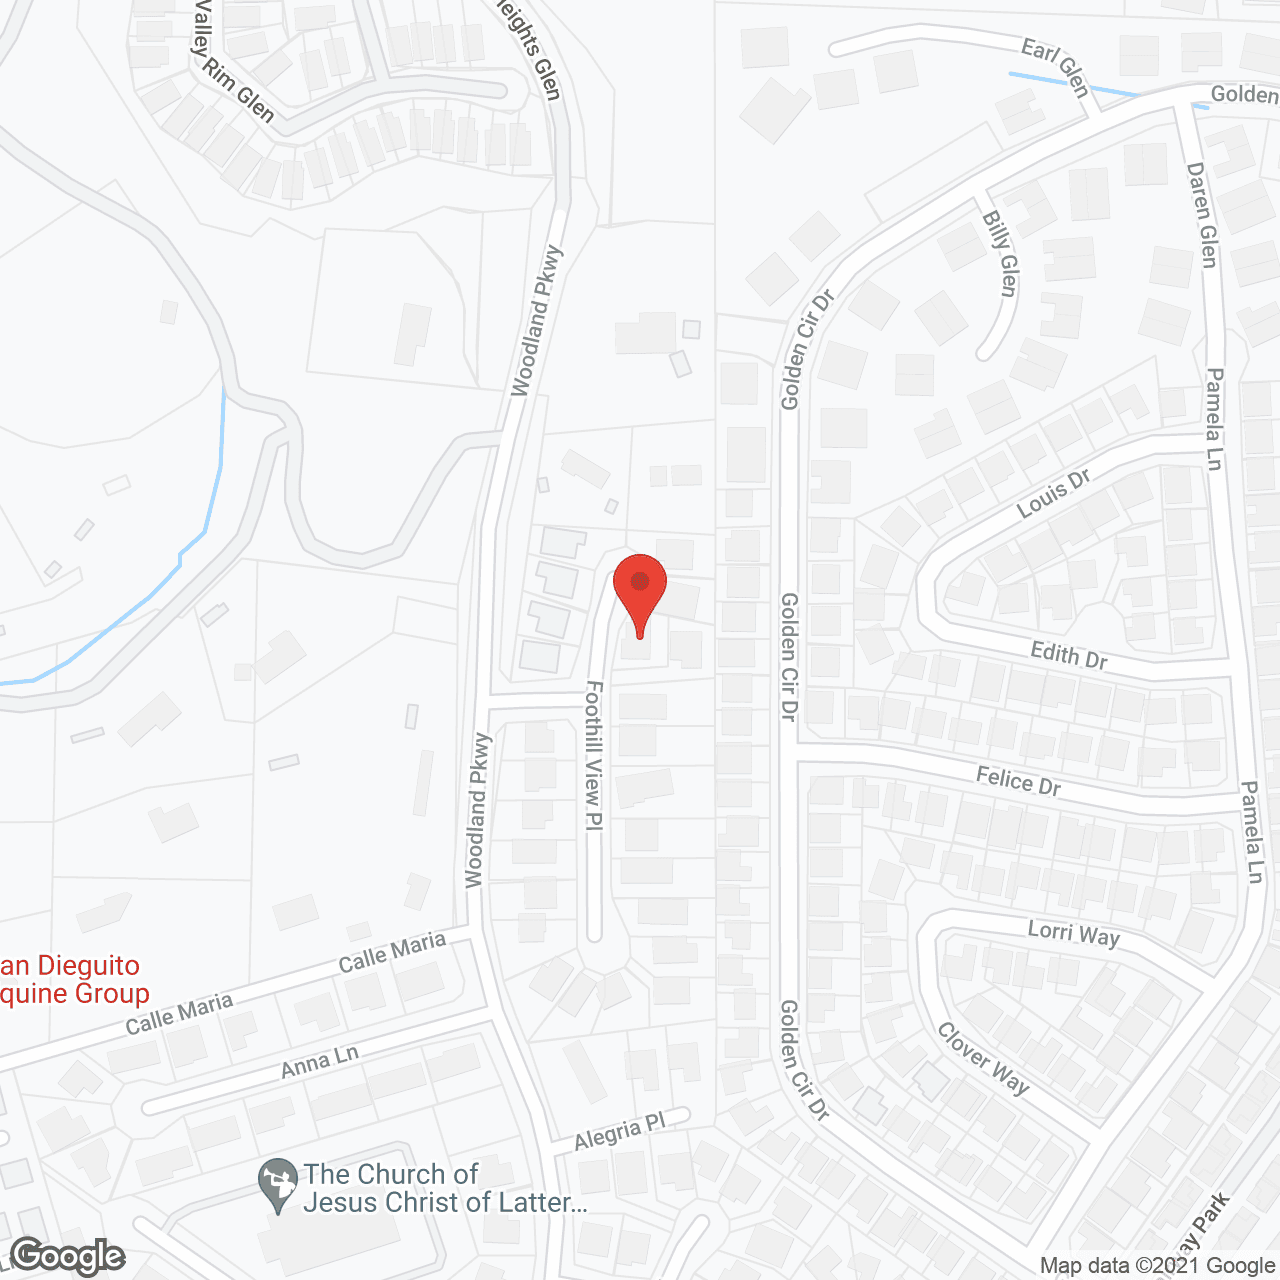 Juehm Residential Care Facility in google map